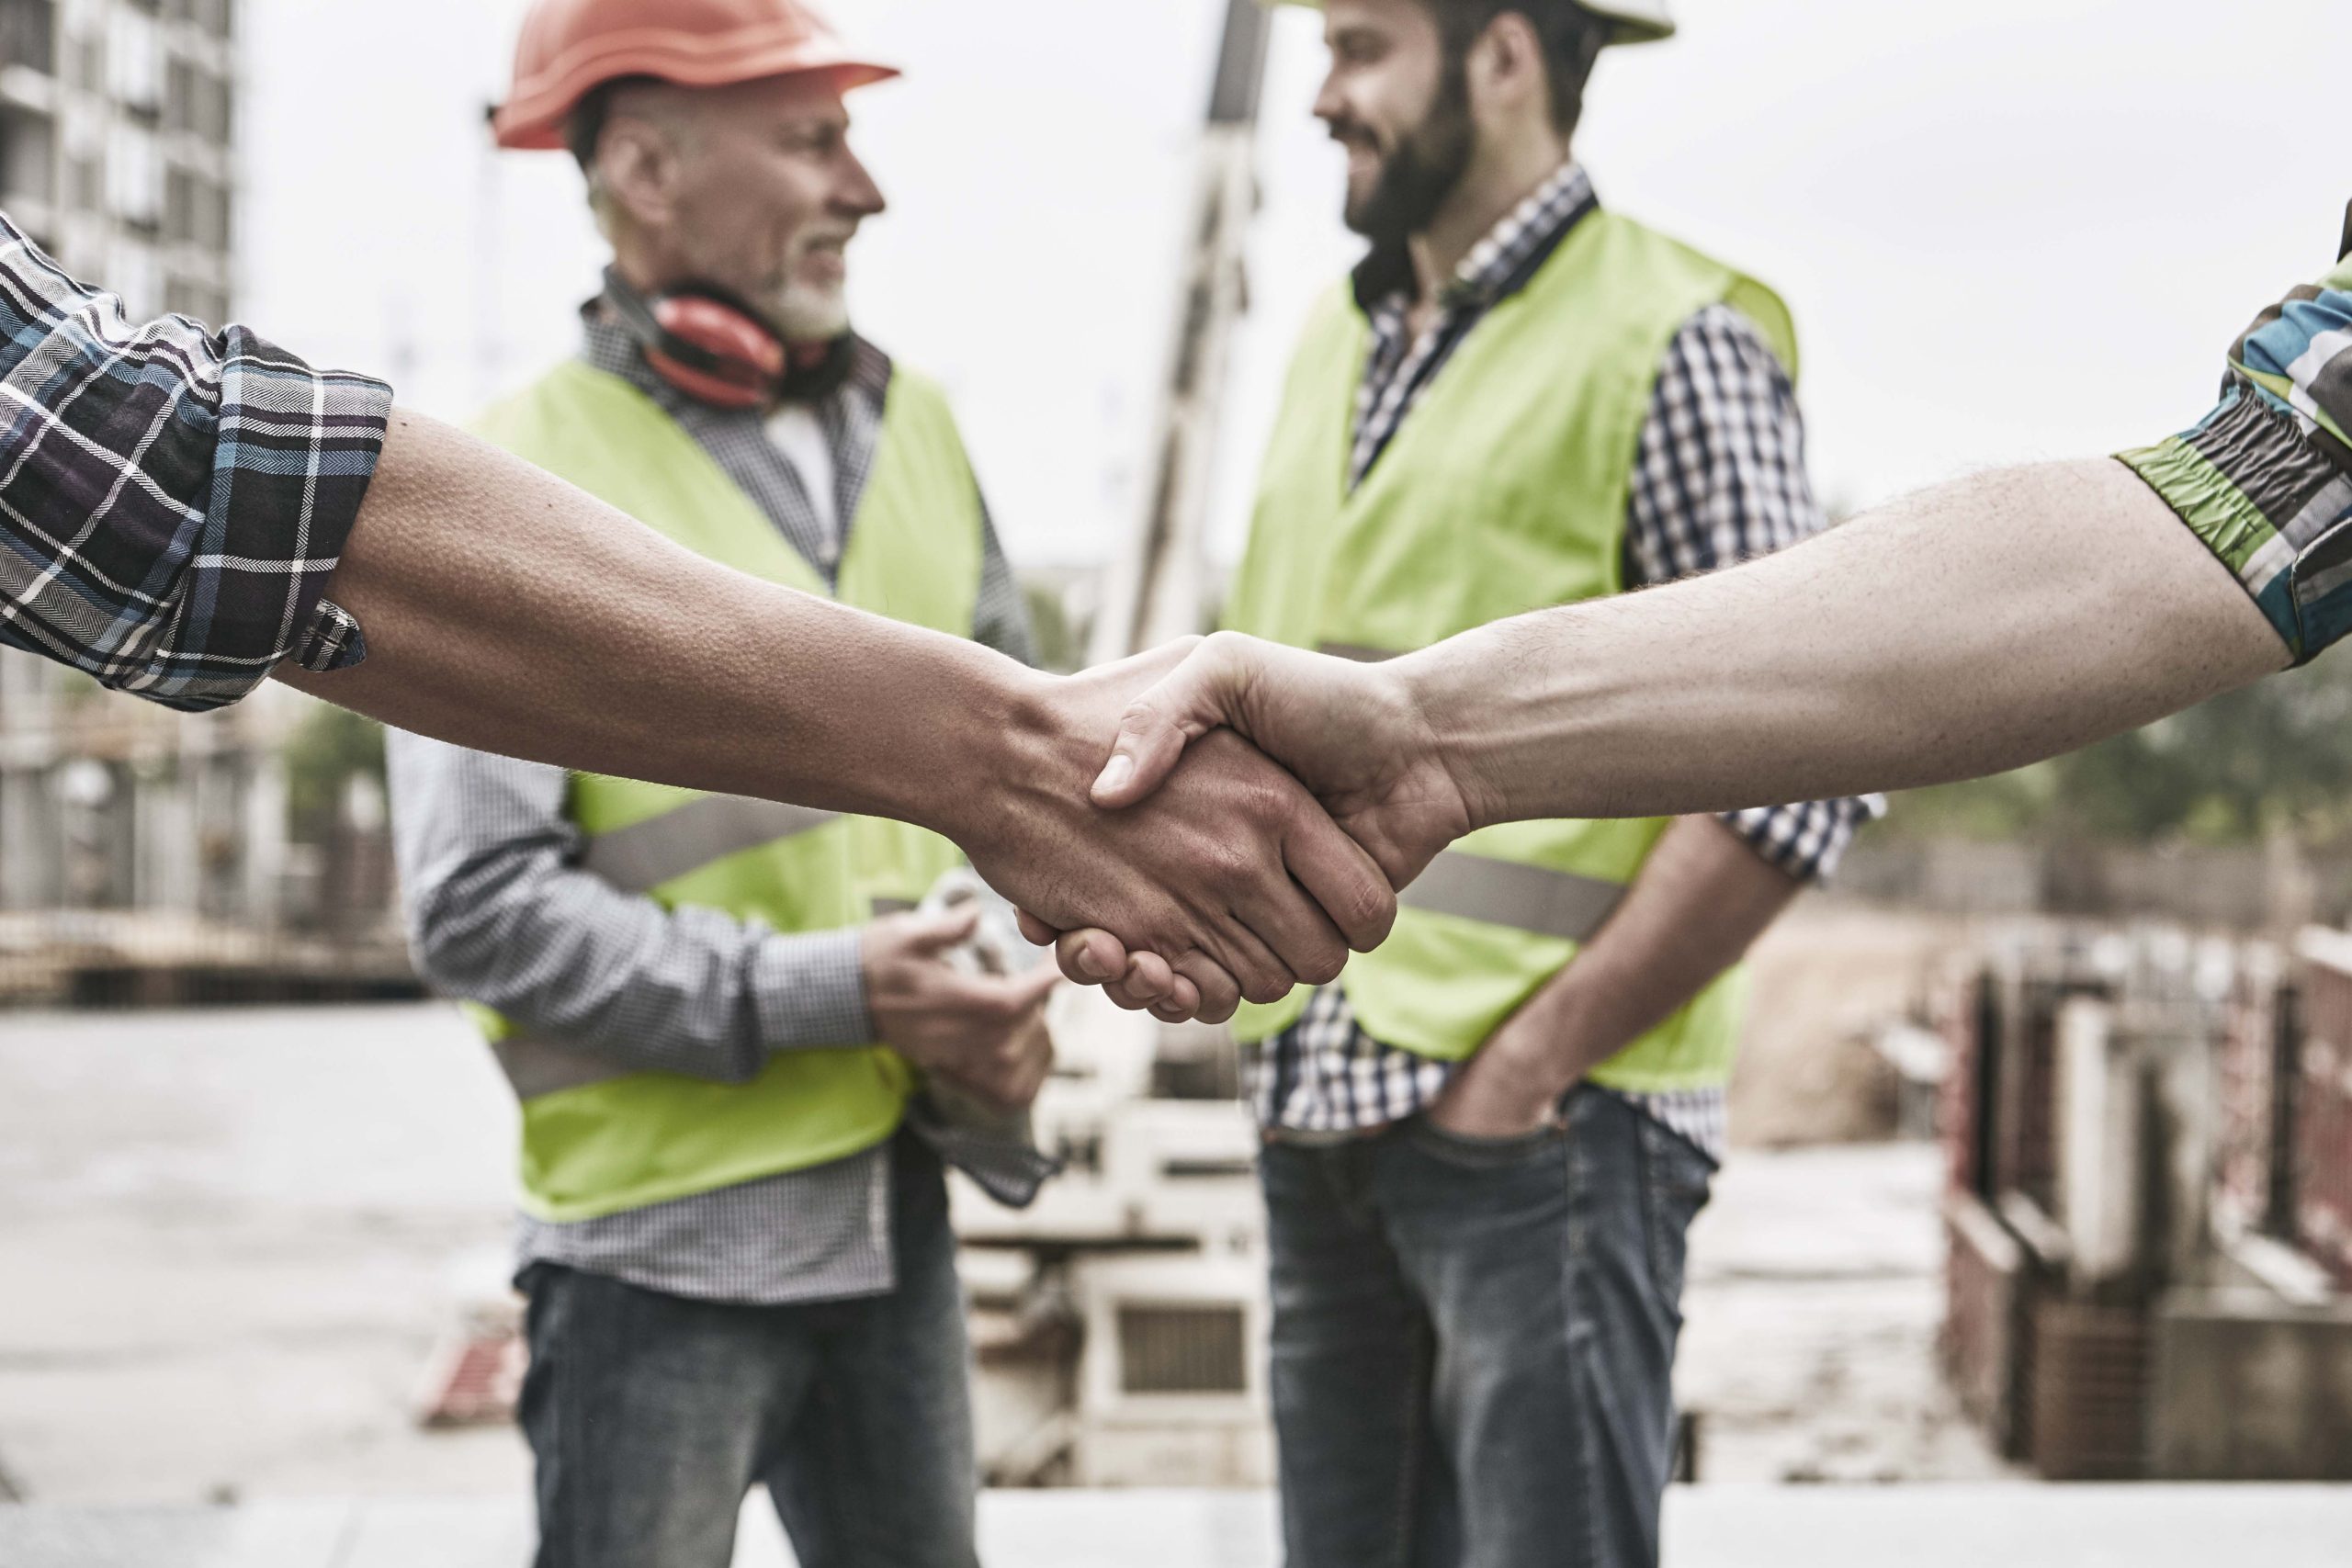 we-did-it-close-up-photo-of-builders-shaking-hands-against-cheerful-colleagues-while-working-together-at-construction-site-team-work